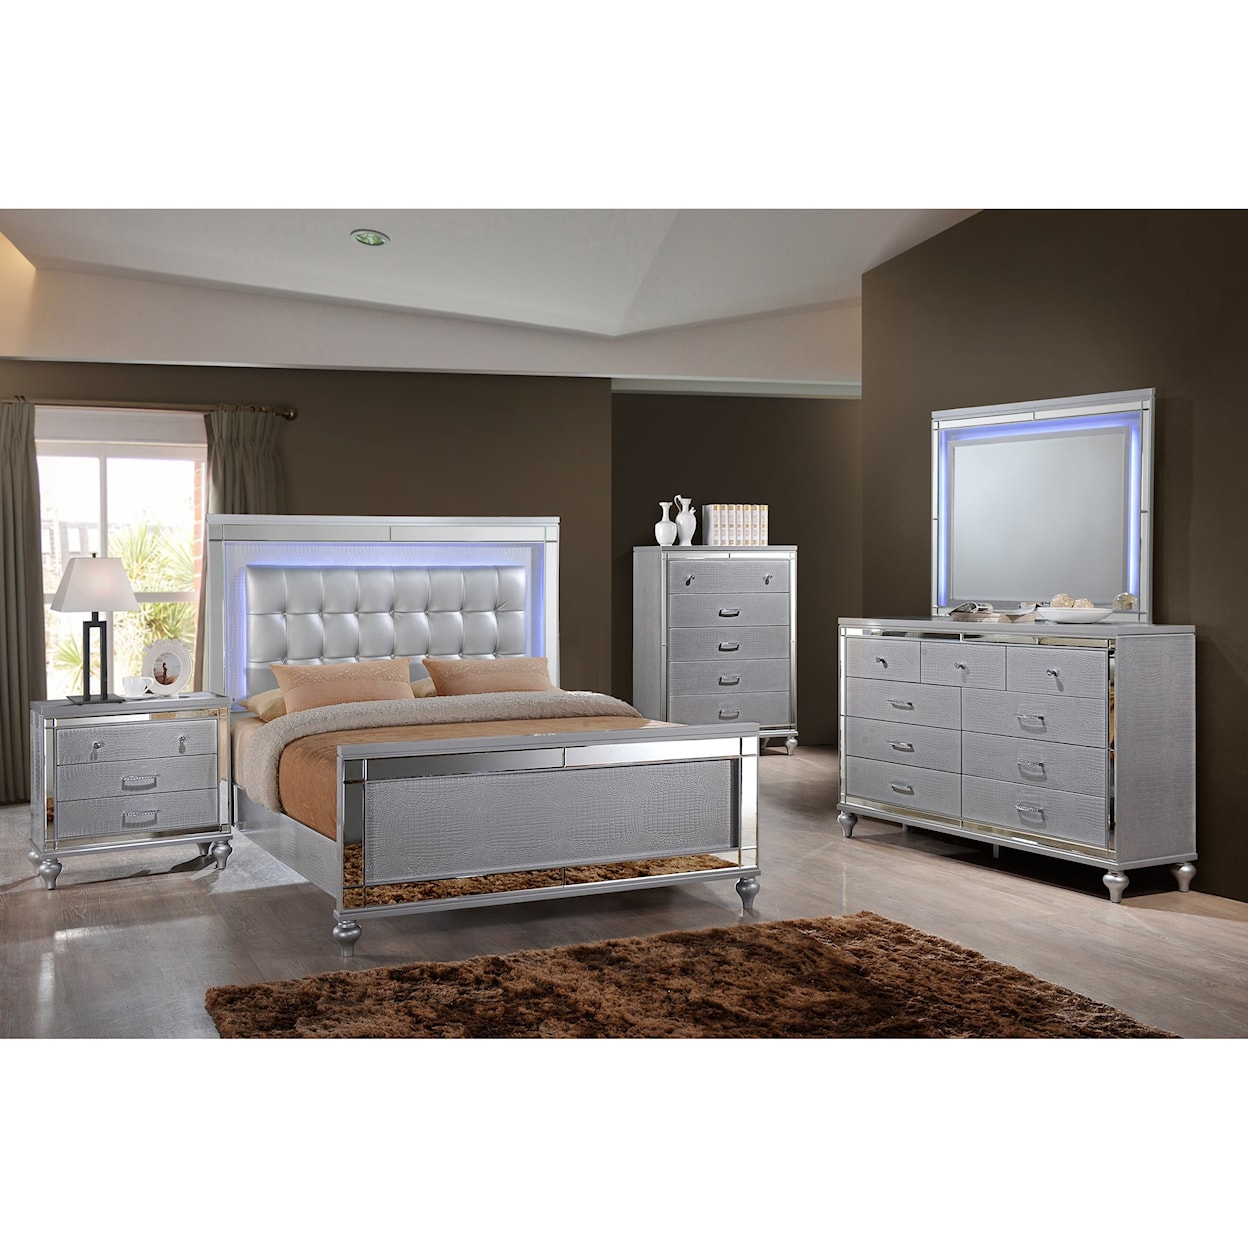 New Classic Furniture Valerie California King Bedroom Group